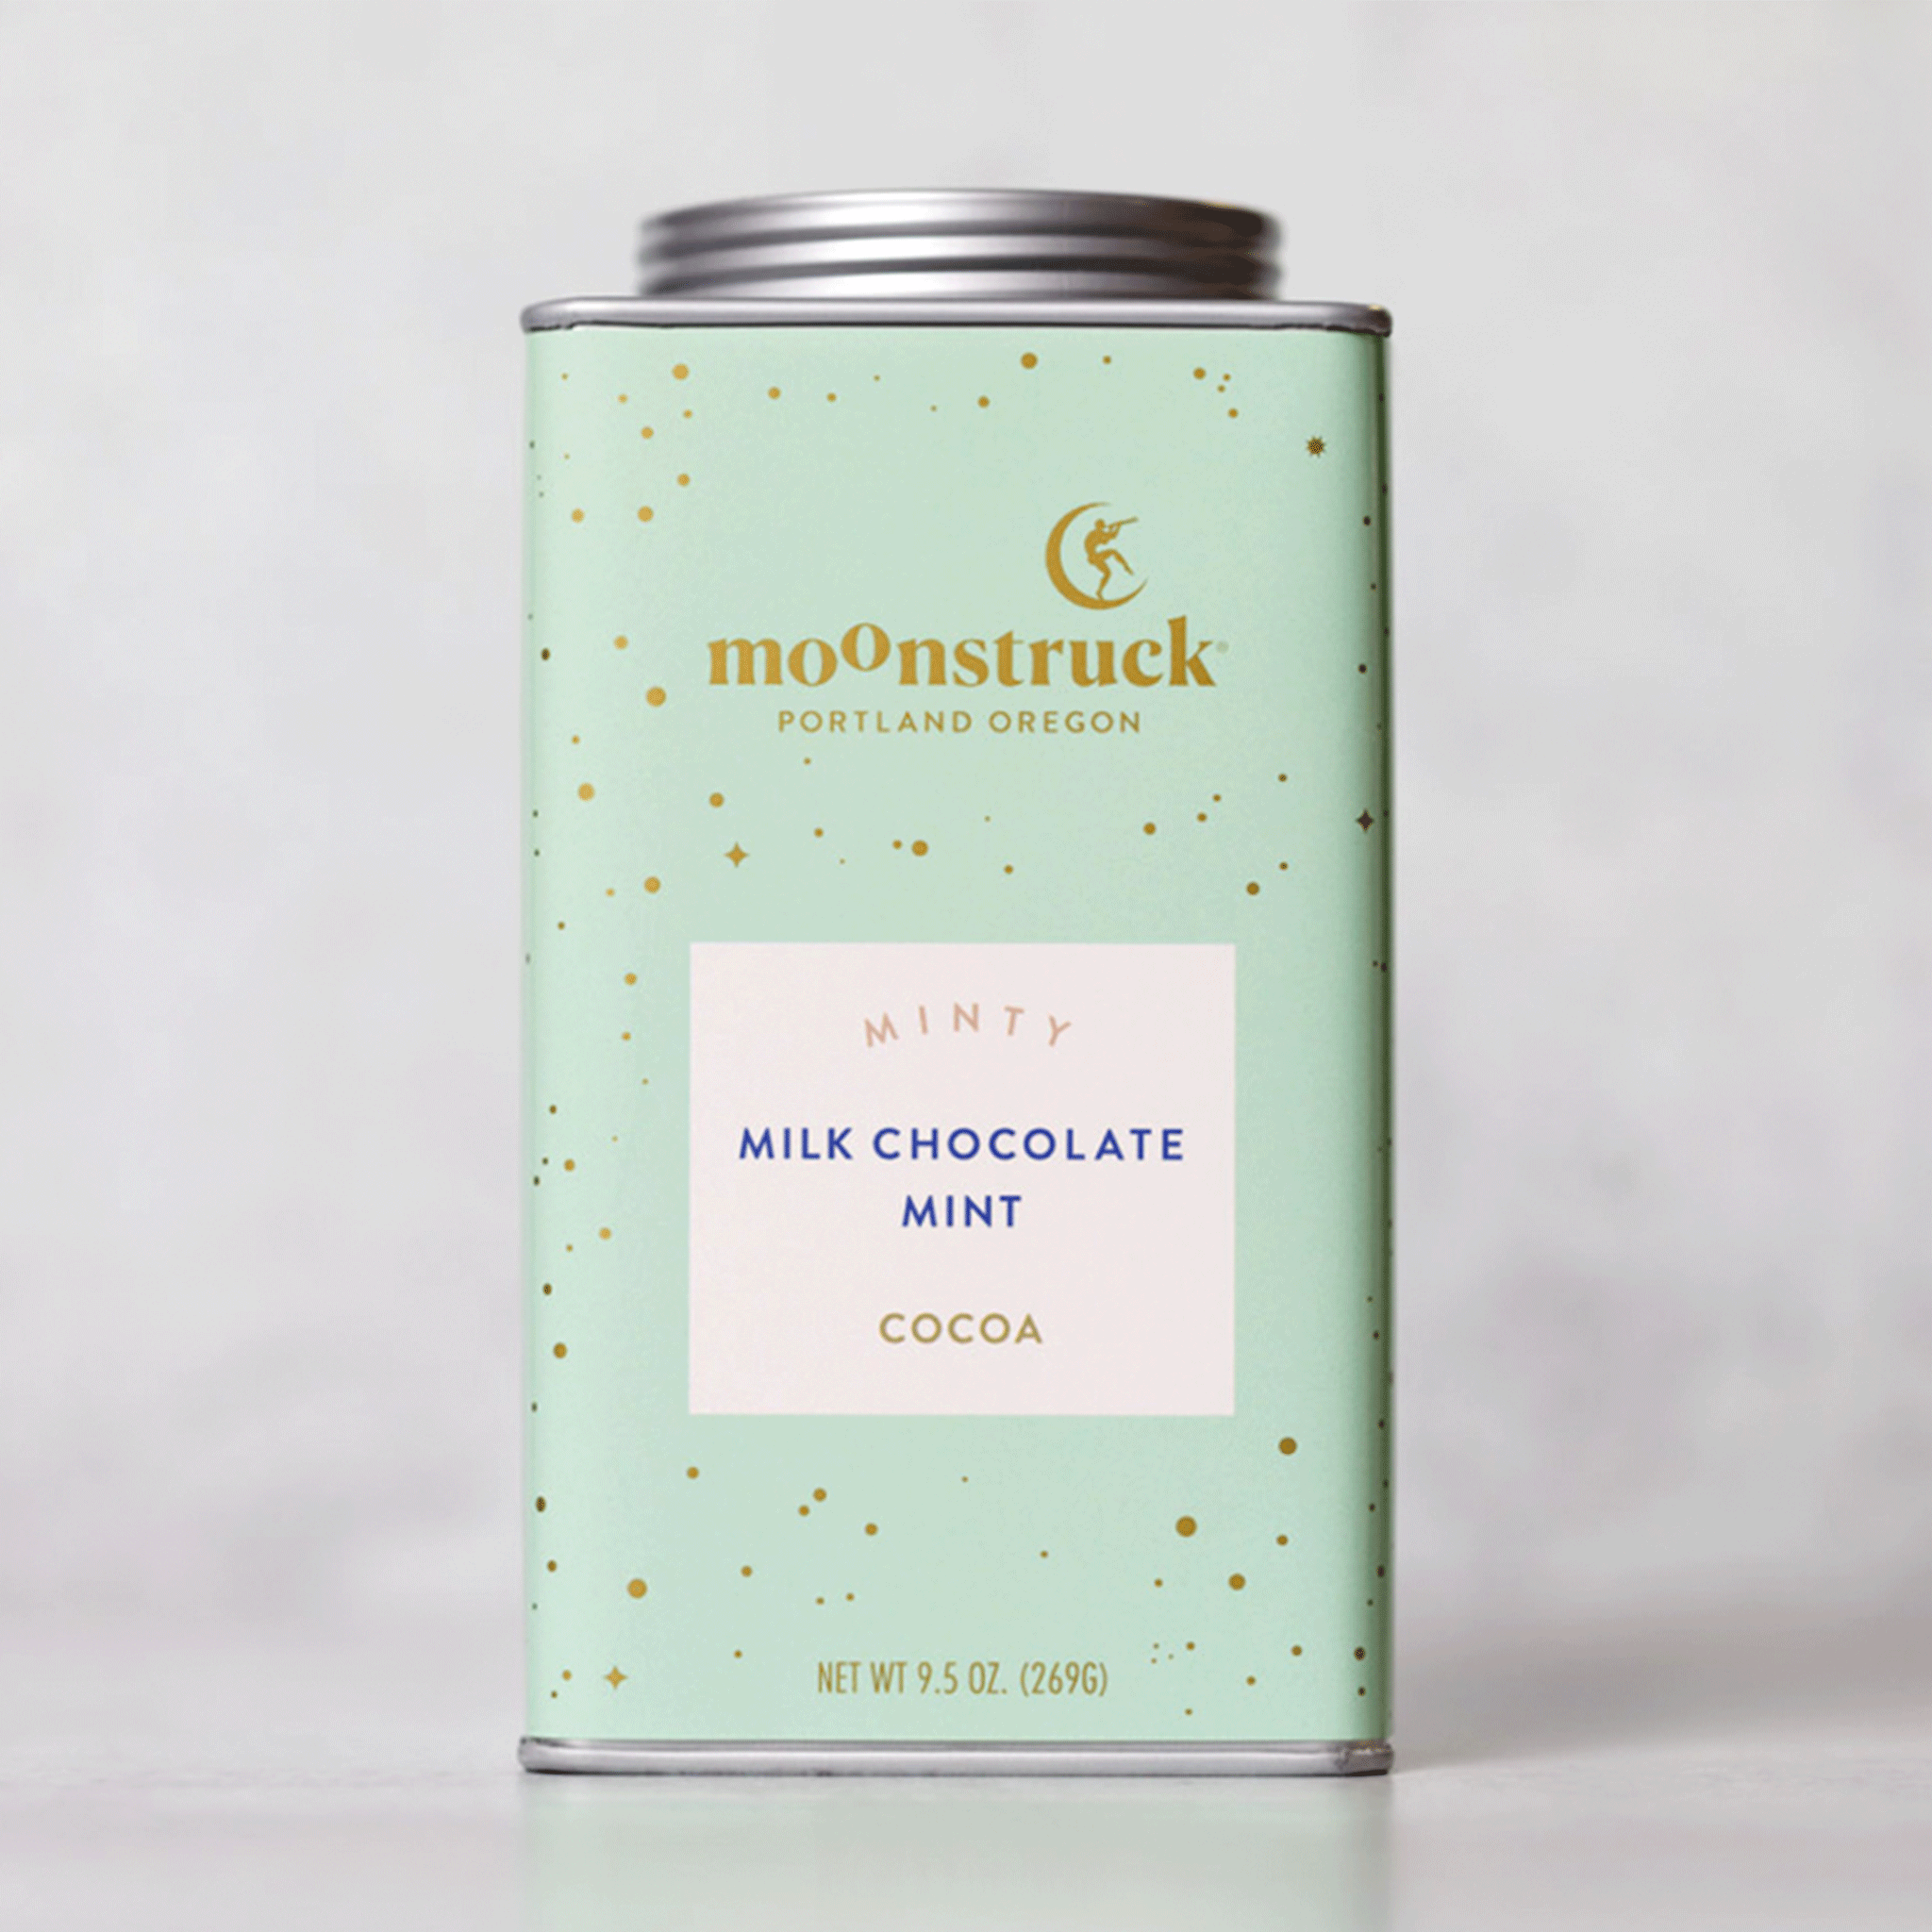 On a grey background is a mint green tin with gold sparkle details and text that reads, &quot;moonstruck Portland Oregon&quot;, &quot;Minty Milk Chocolate Mint Cocoa&quot;.